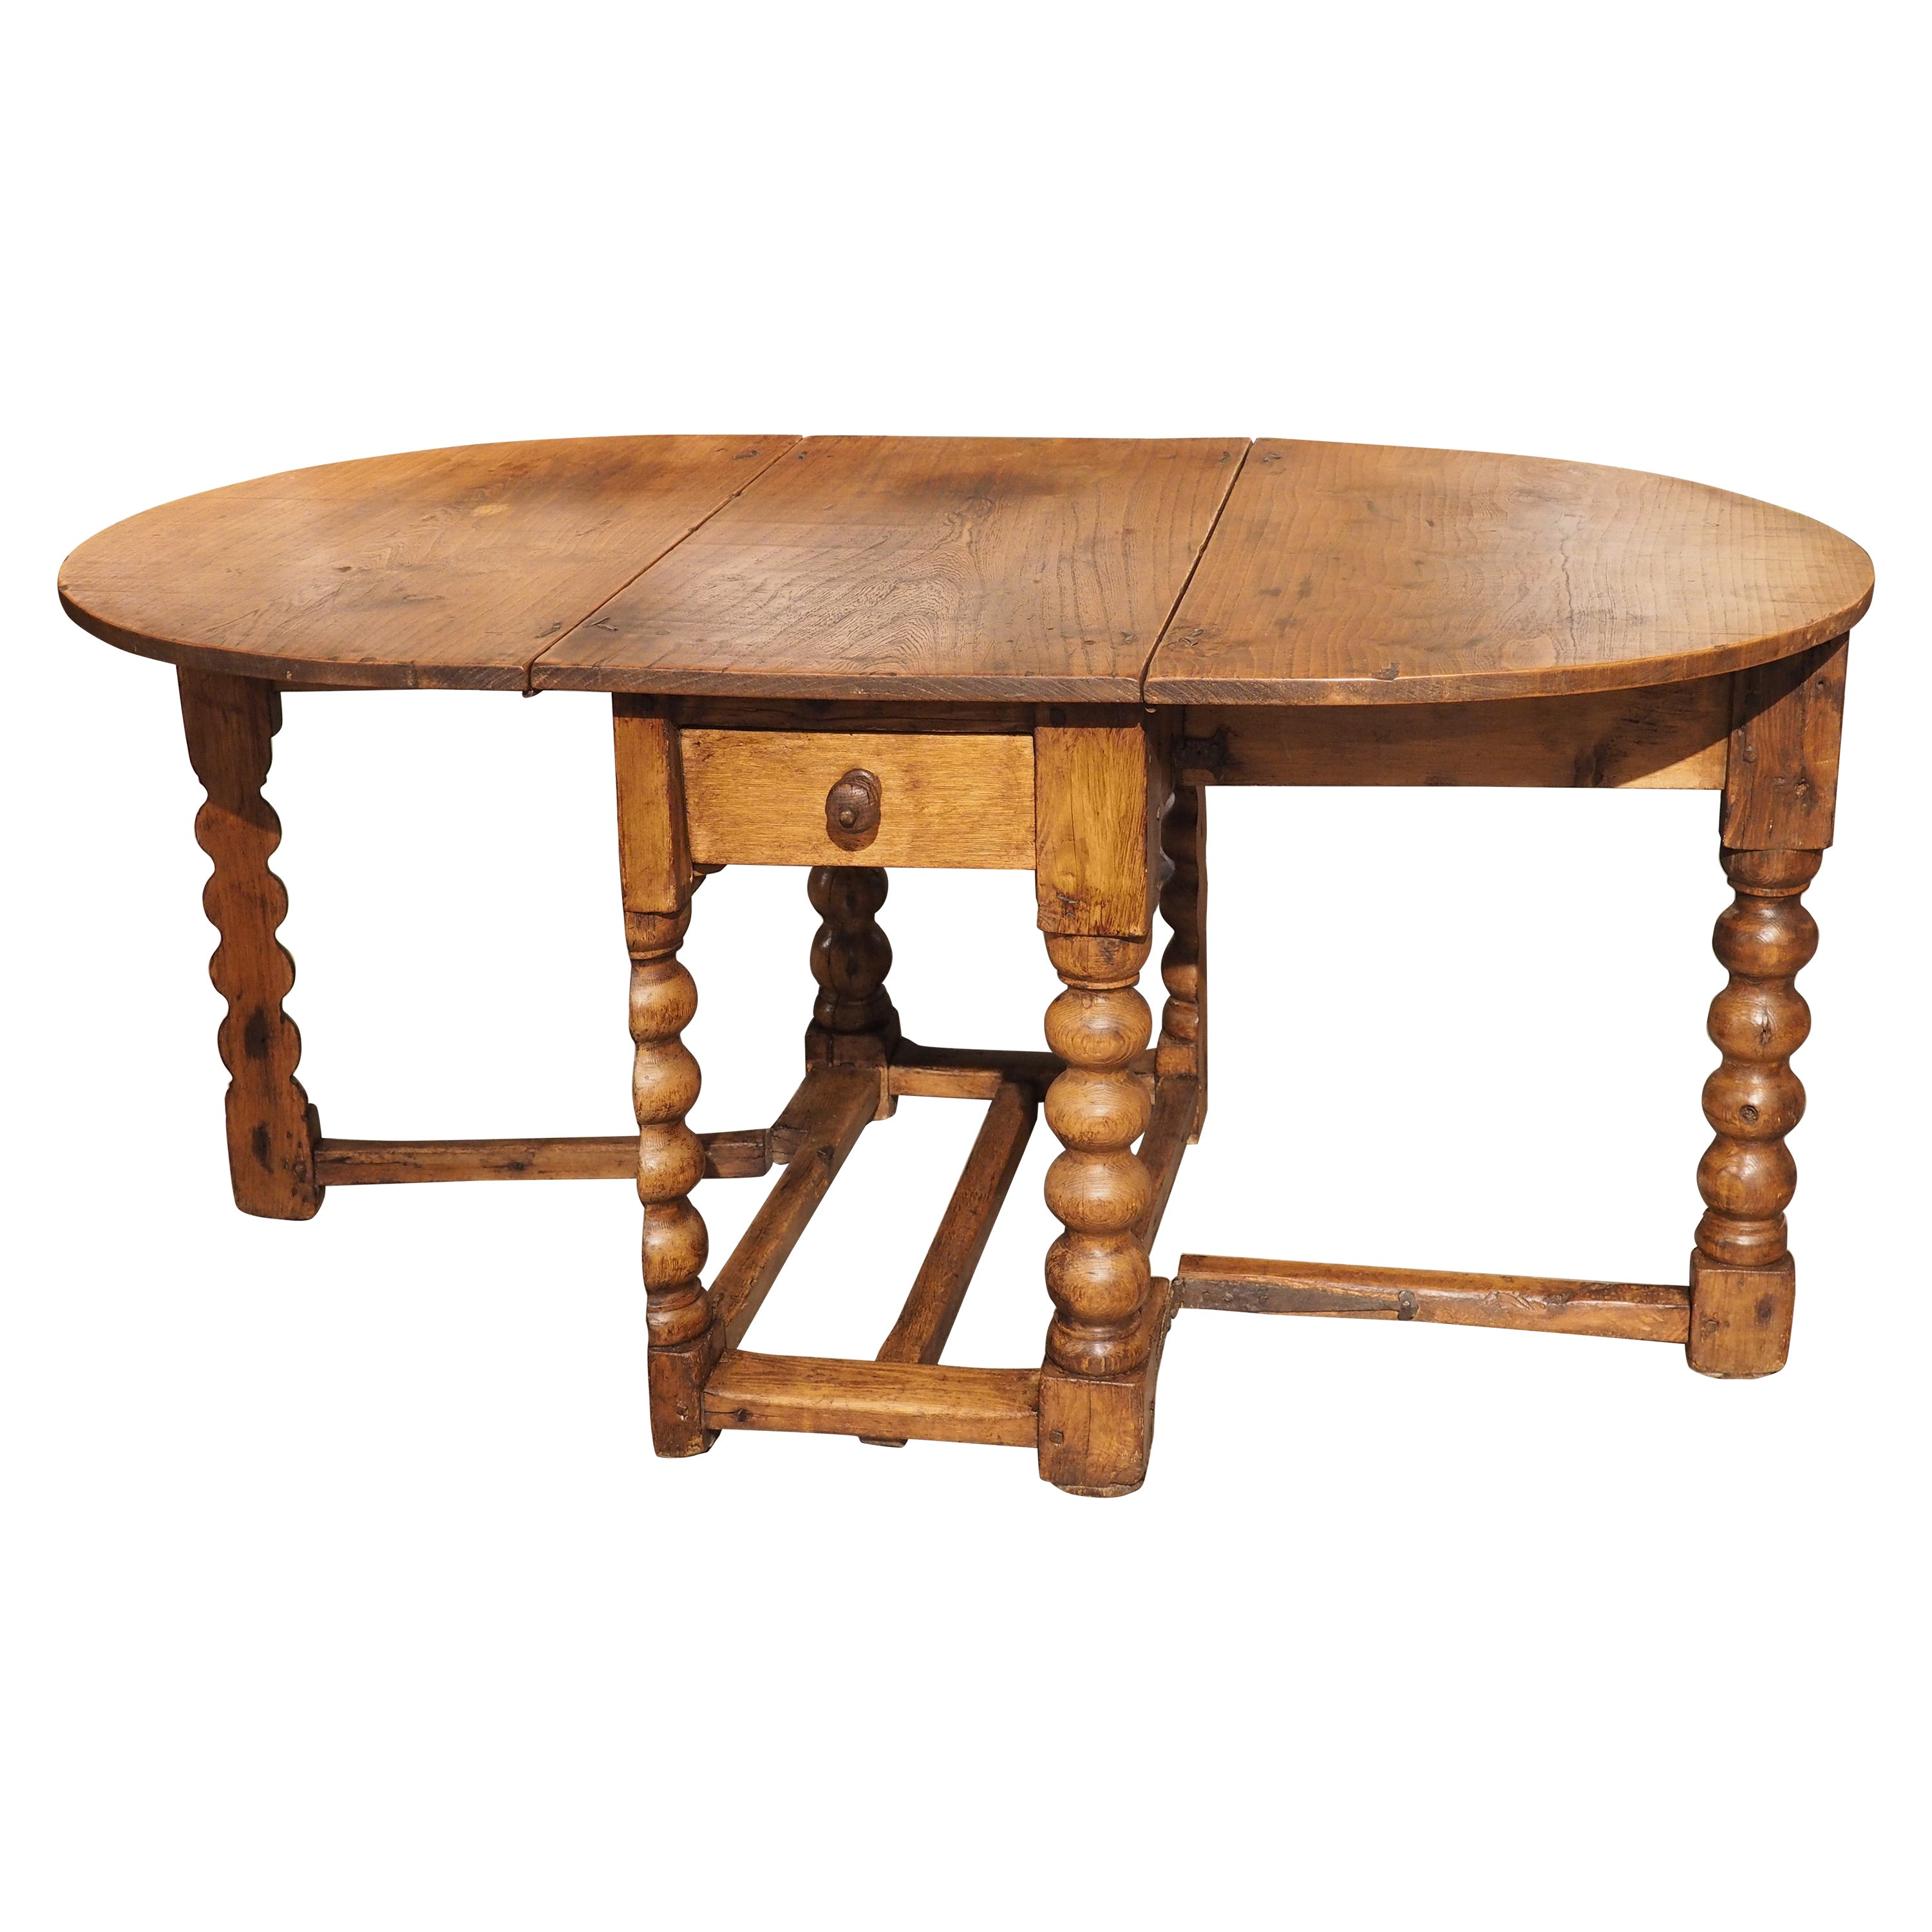 17th Century Oval Gate Leg Table from England